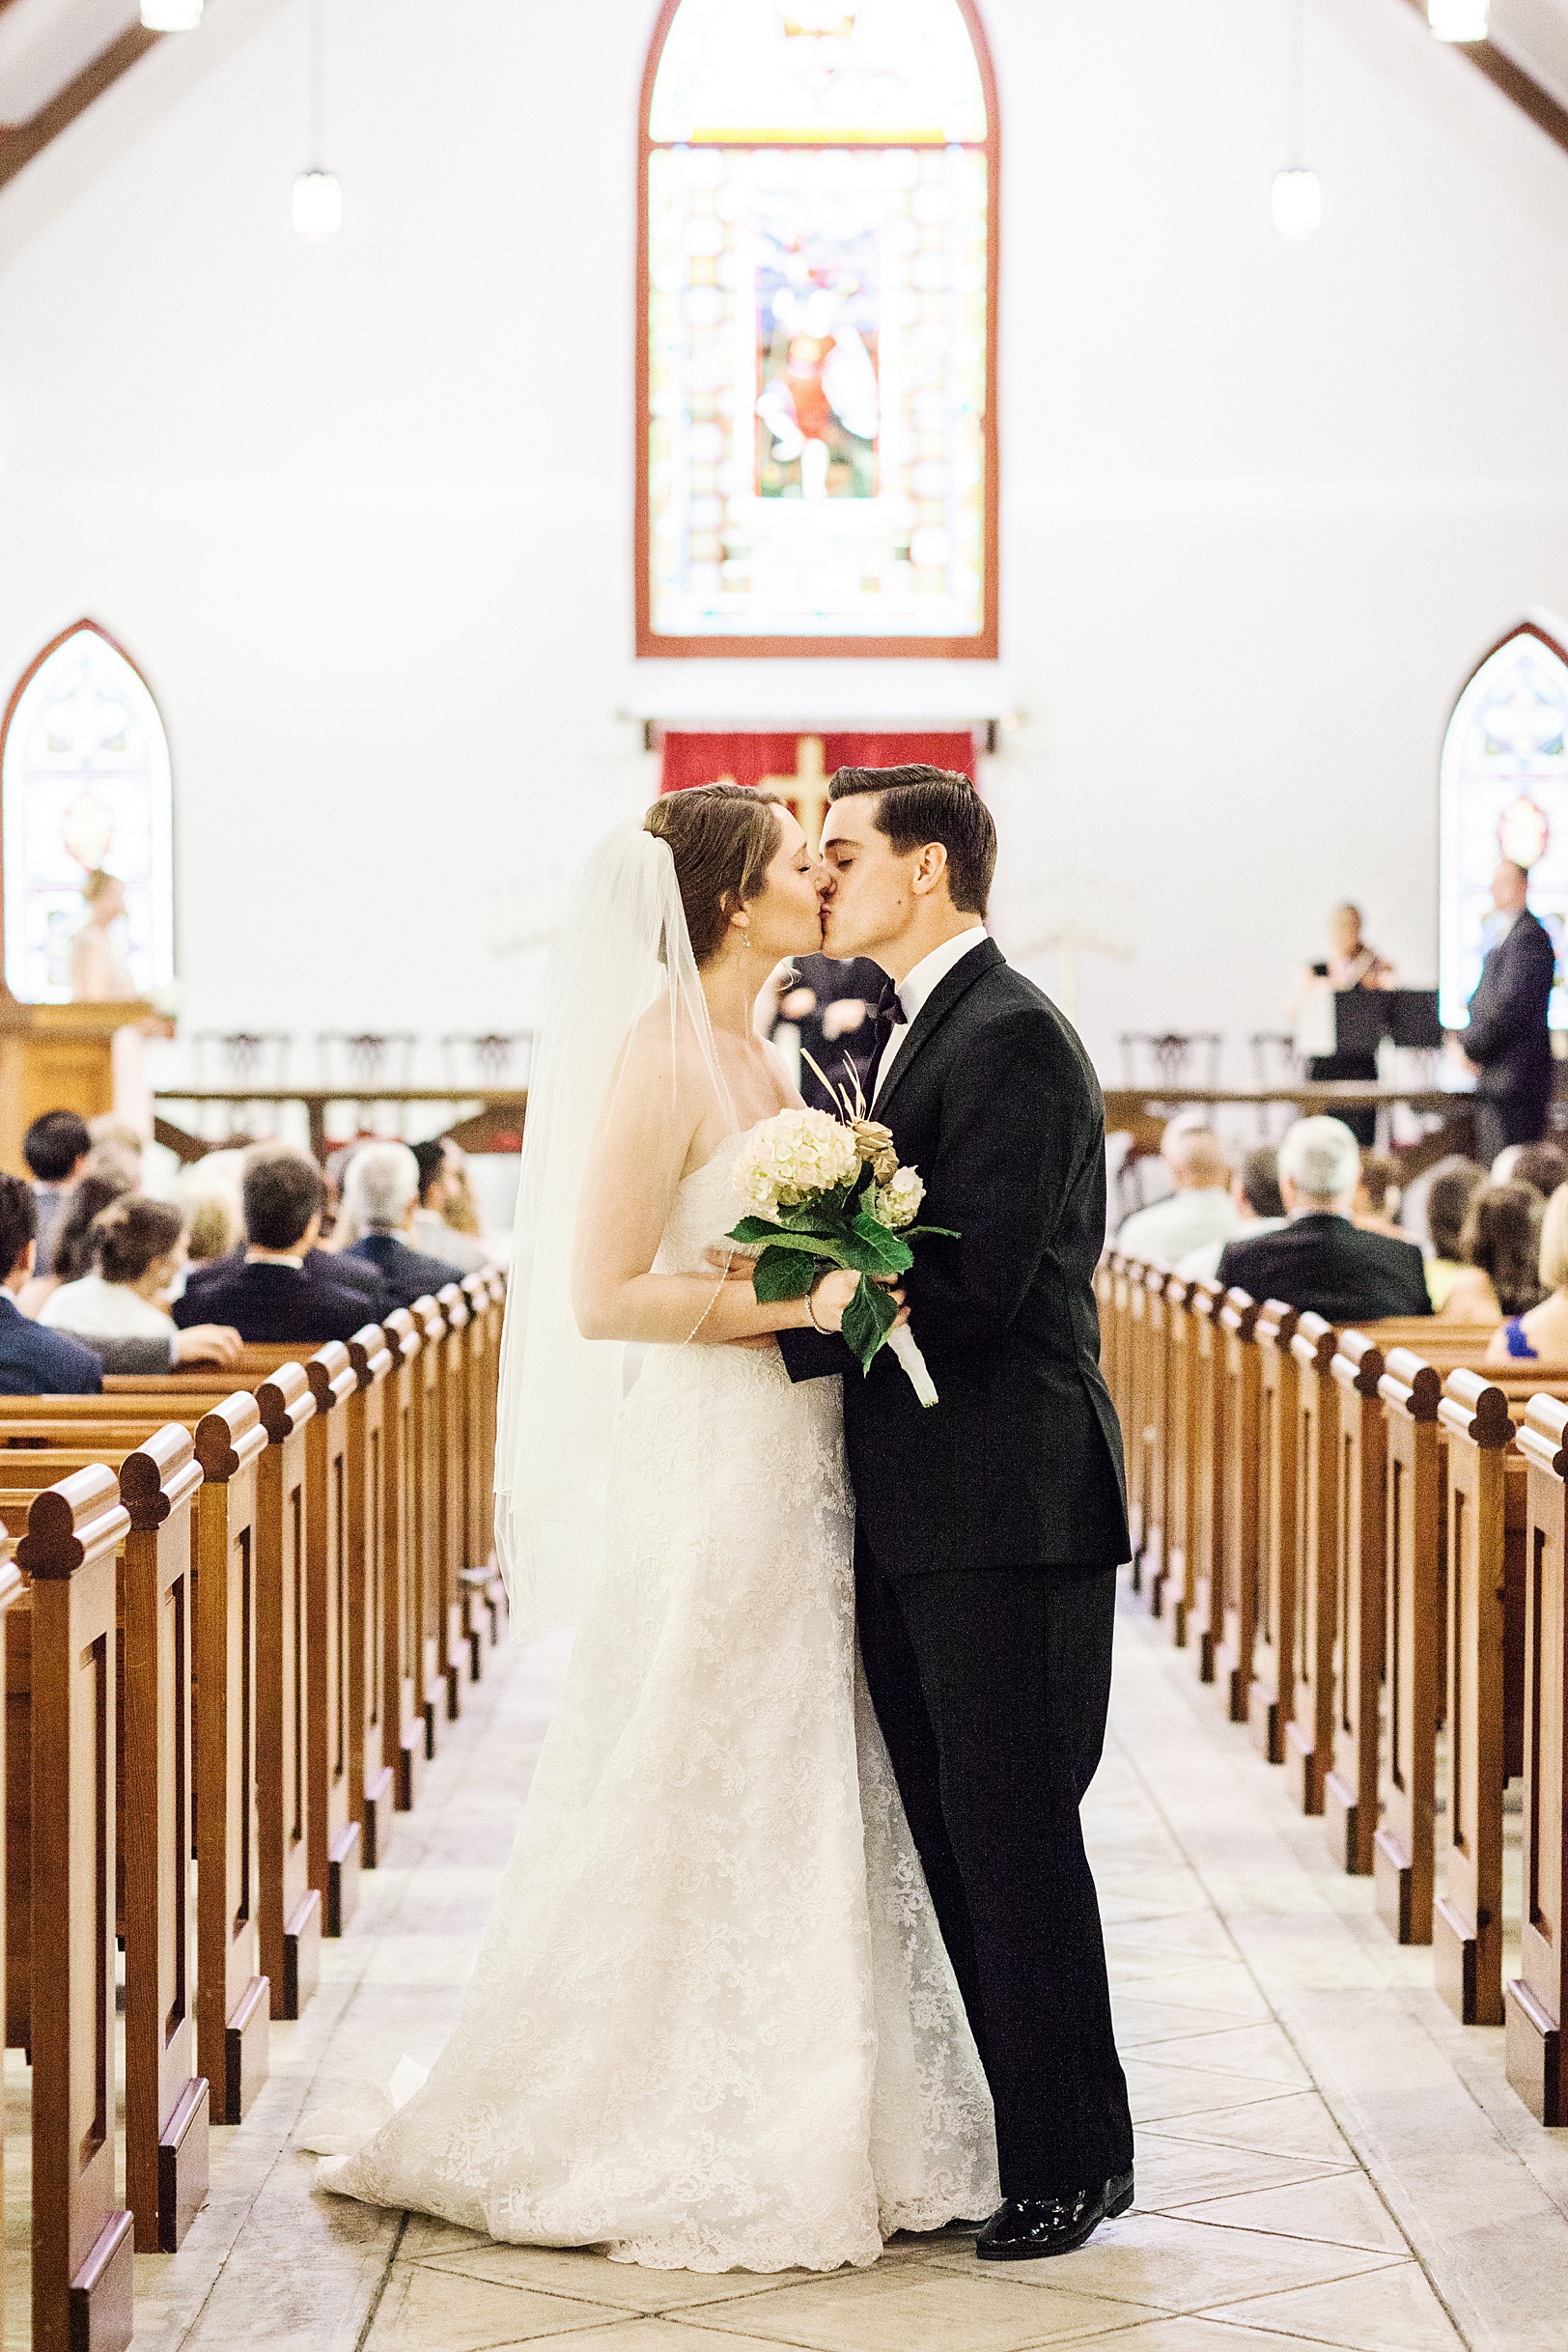 Bride and Groom Kiss on their way down aisle at St. Luke's Chapel | Kaitlin Scott Photography